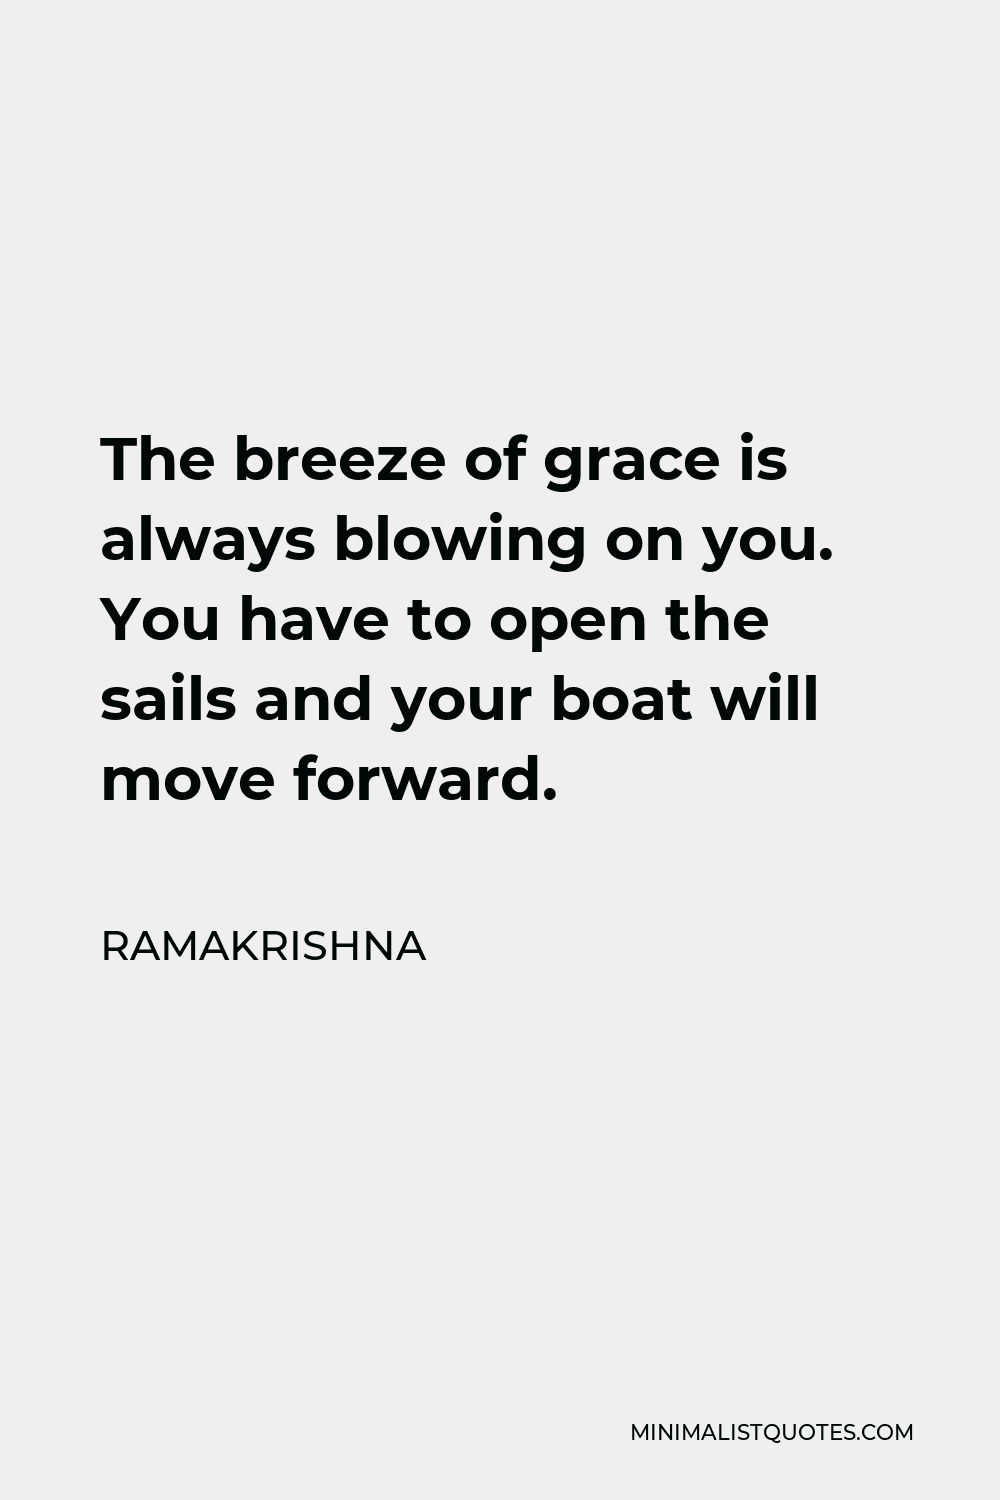 Ramakrishna Quote - The breeze of grace is always blowing on you. You have to open the sails and your boat will move forward.